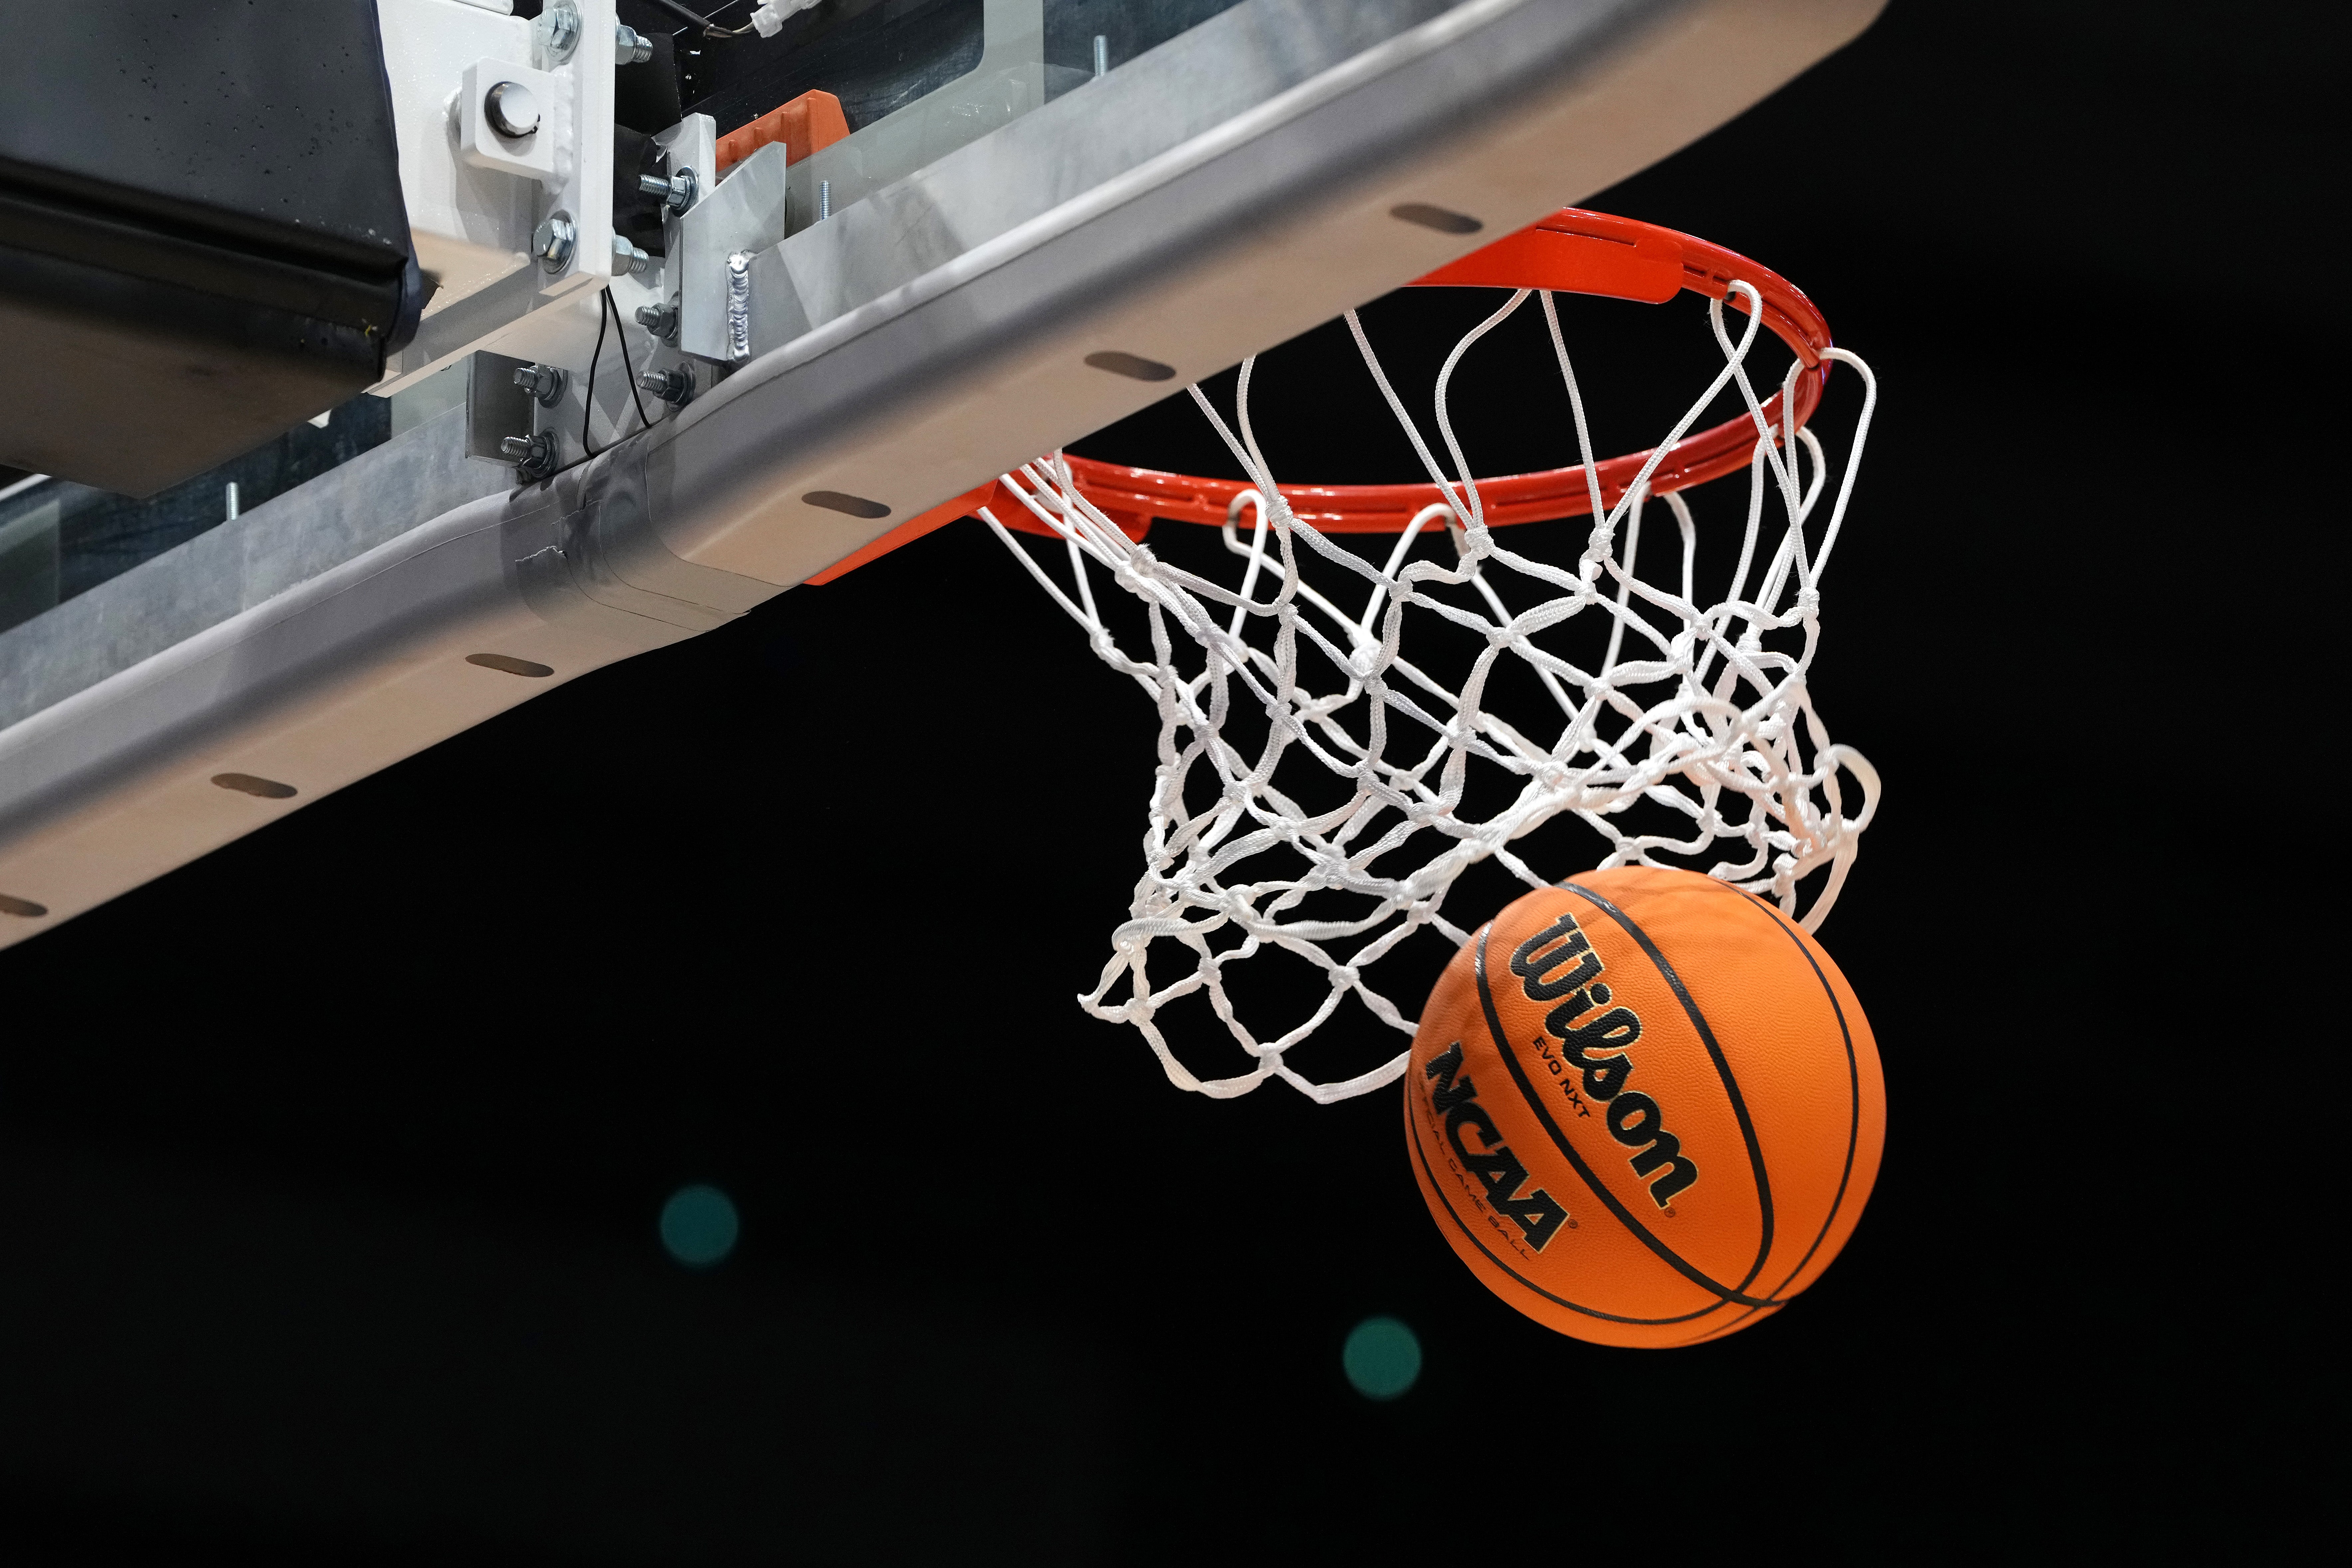 Ireland Basketball have ordered the fianl 0.3 seconds of a match to be played